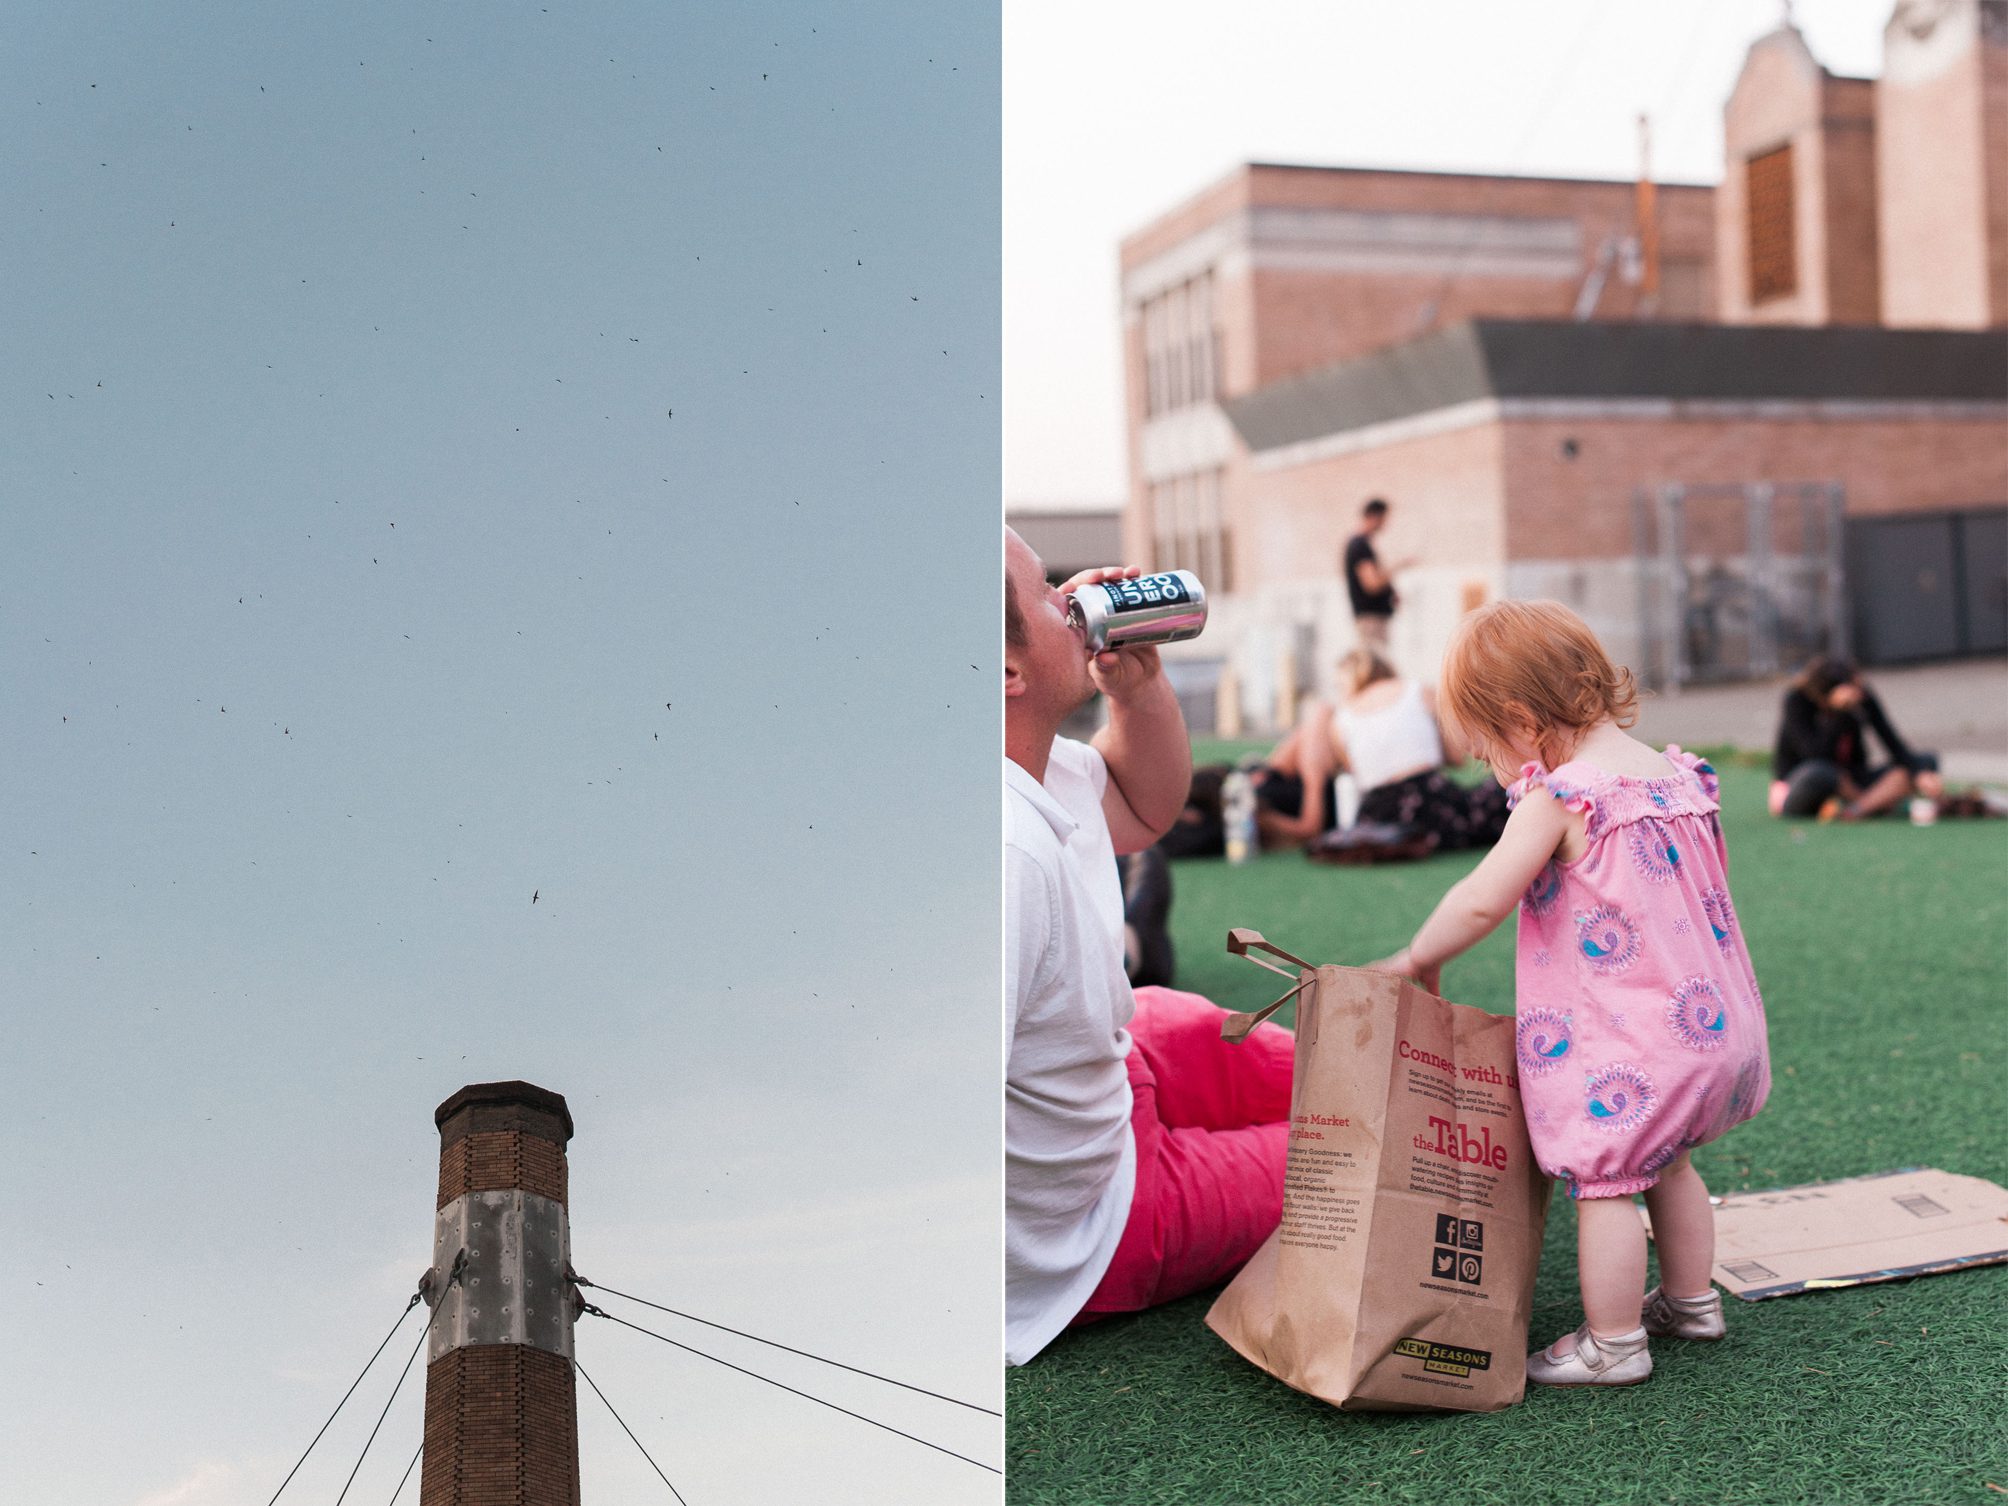 Local Portlanders wait patiently for the Chapman School Swifts to make their decent. Travel photography by Briana Morrison